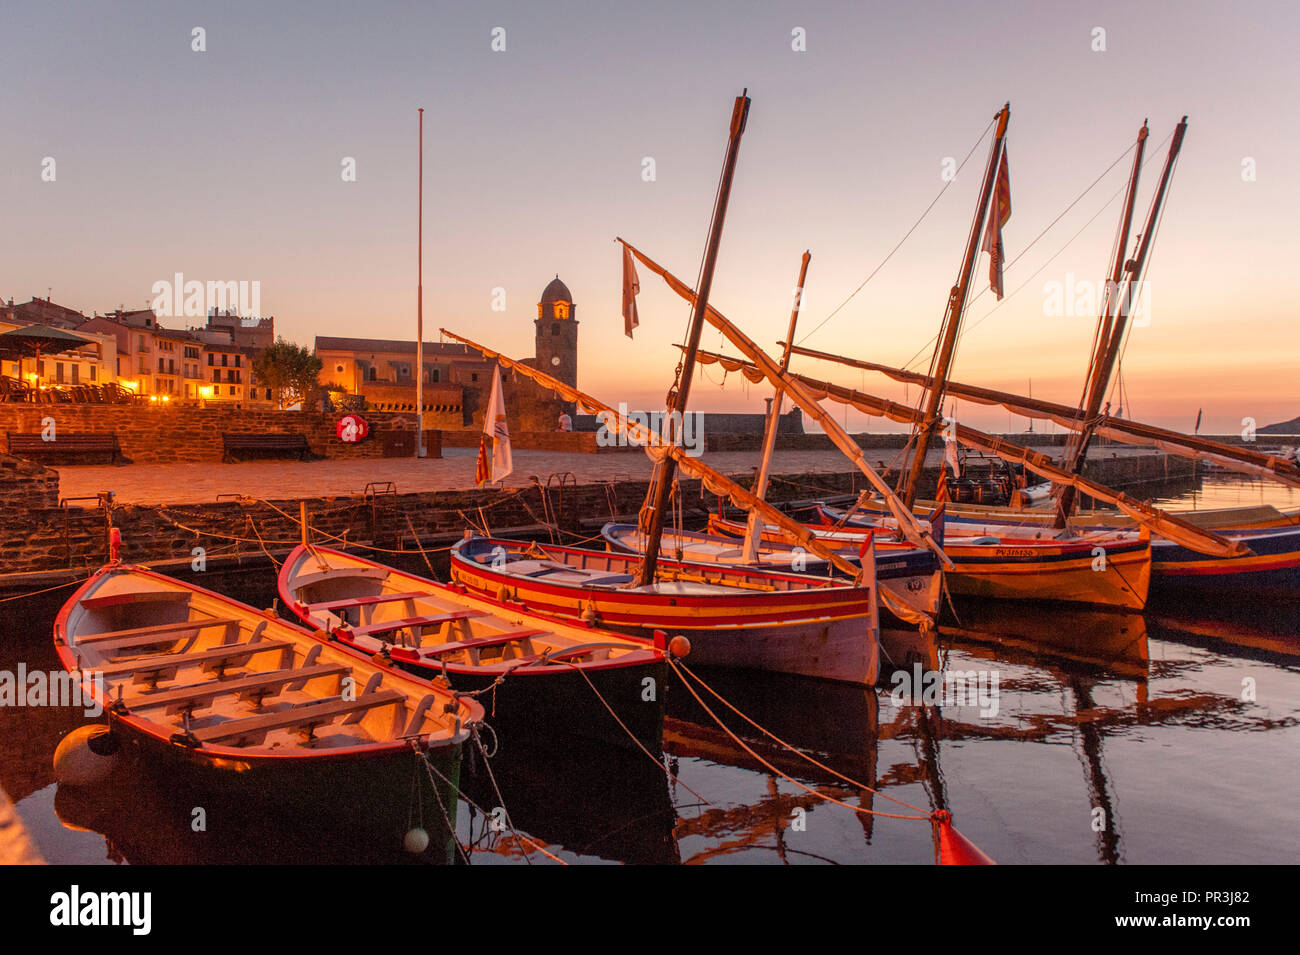 Traditional Catalan boats are moored in the port of Collioure, seen in the early morning light Stock Photo